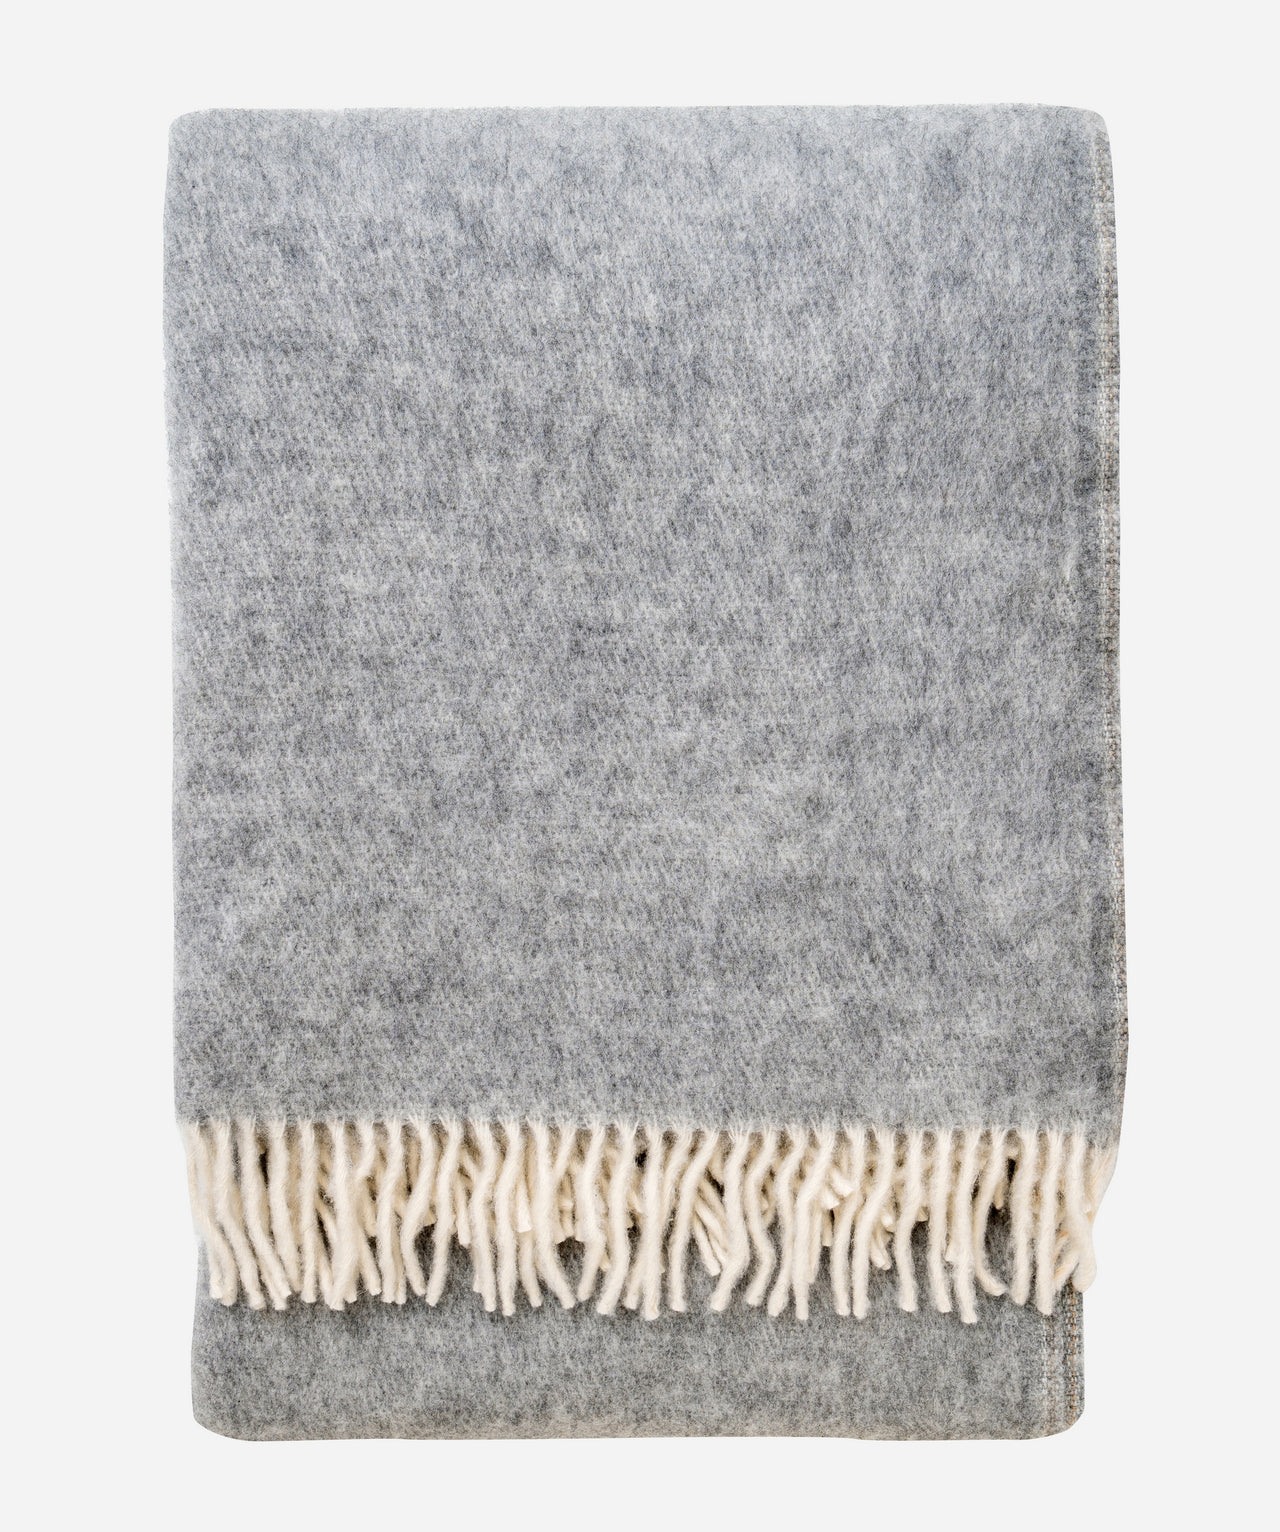 Heavy & Thick Wool Throw Blanket - Gray Throw Blanket - 100% Pure Sheep Wool